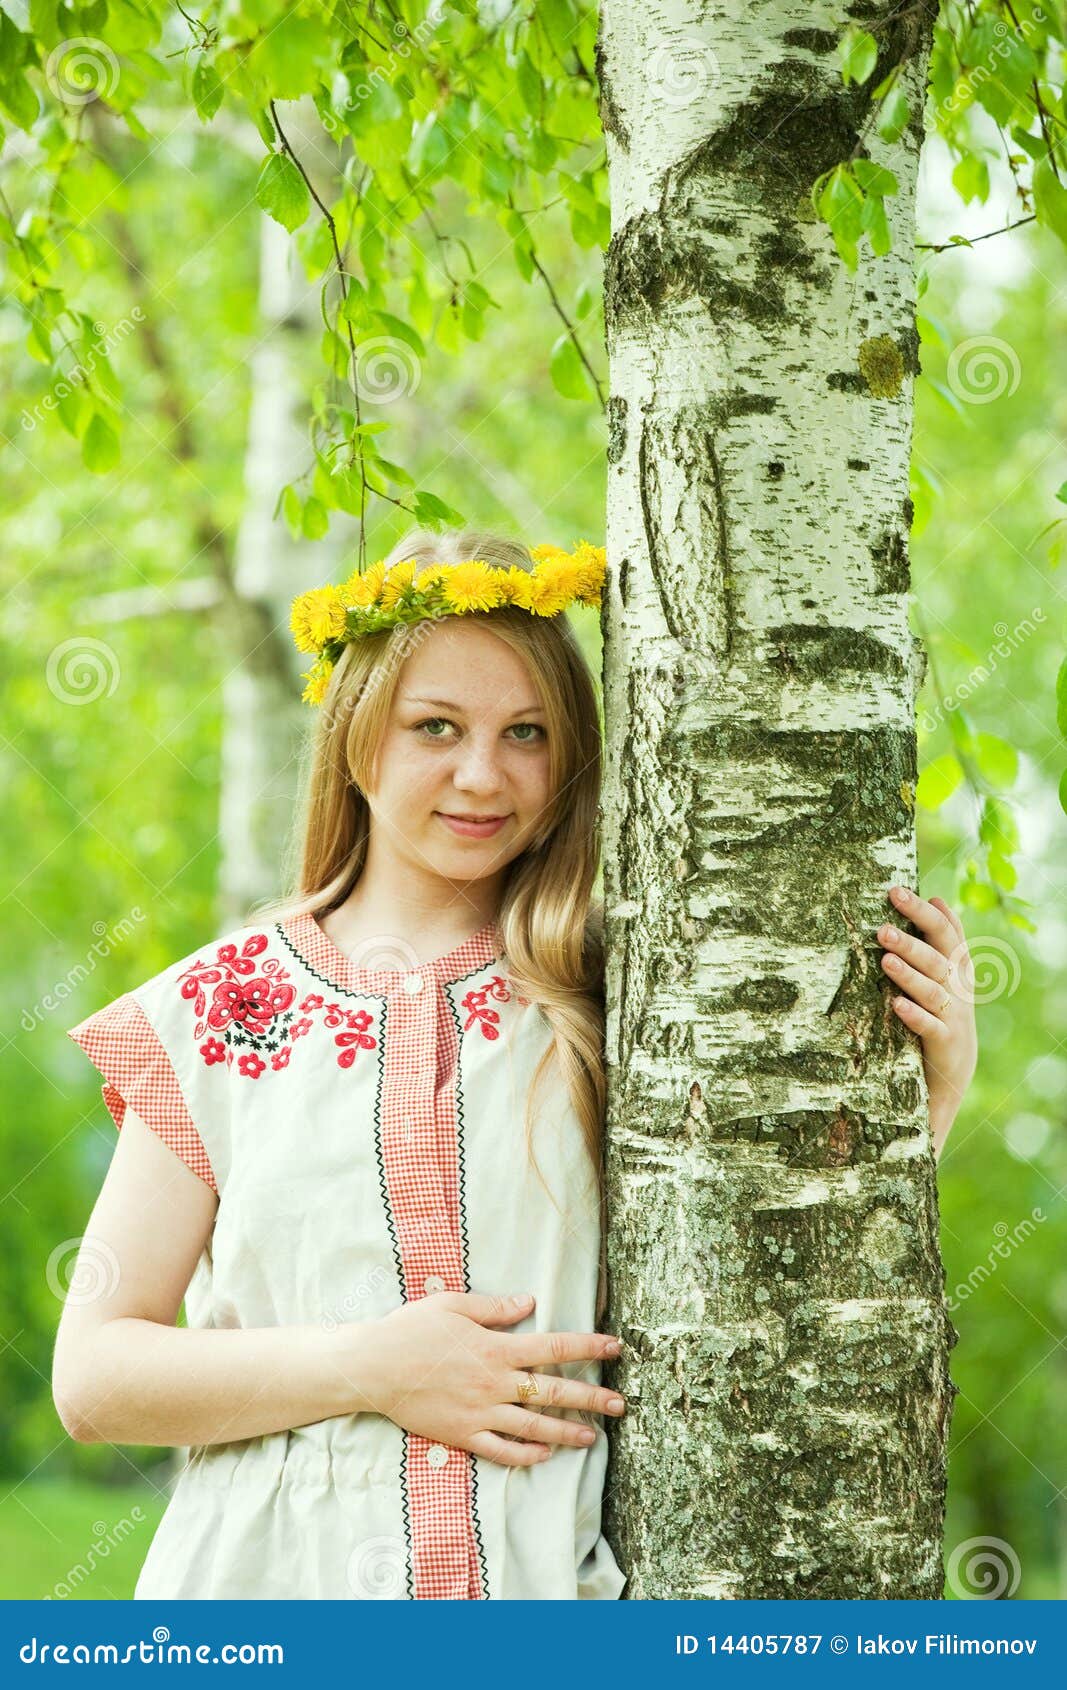 Girl in Traditional Clothes Stock Image - Image of happy, park: 14405787